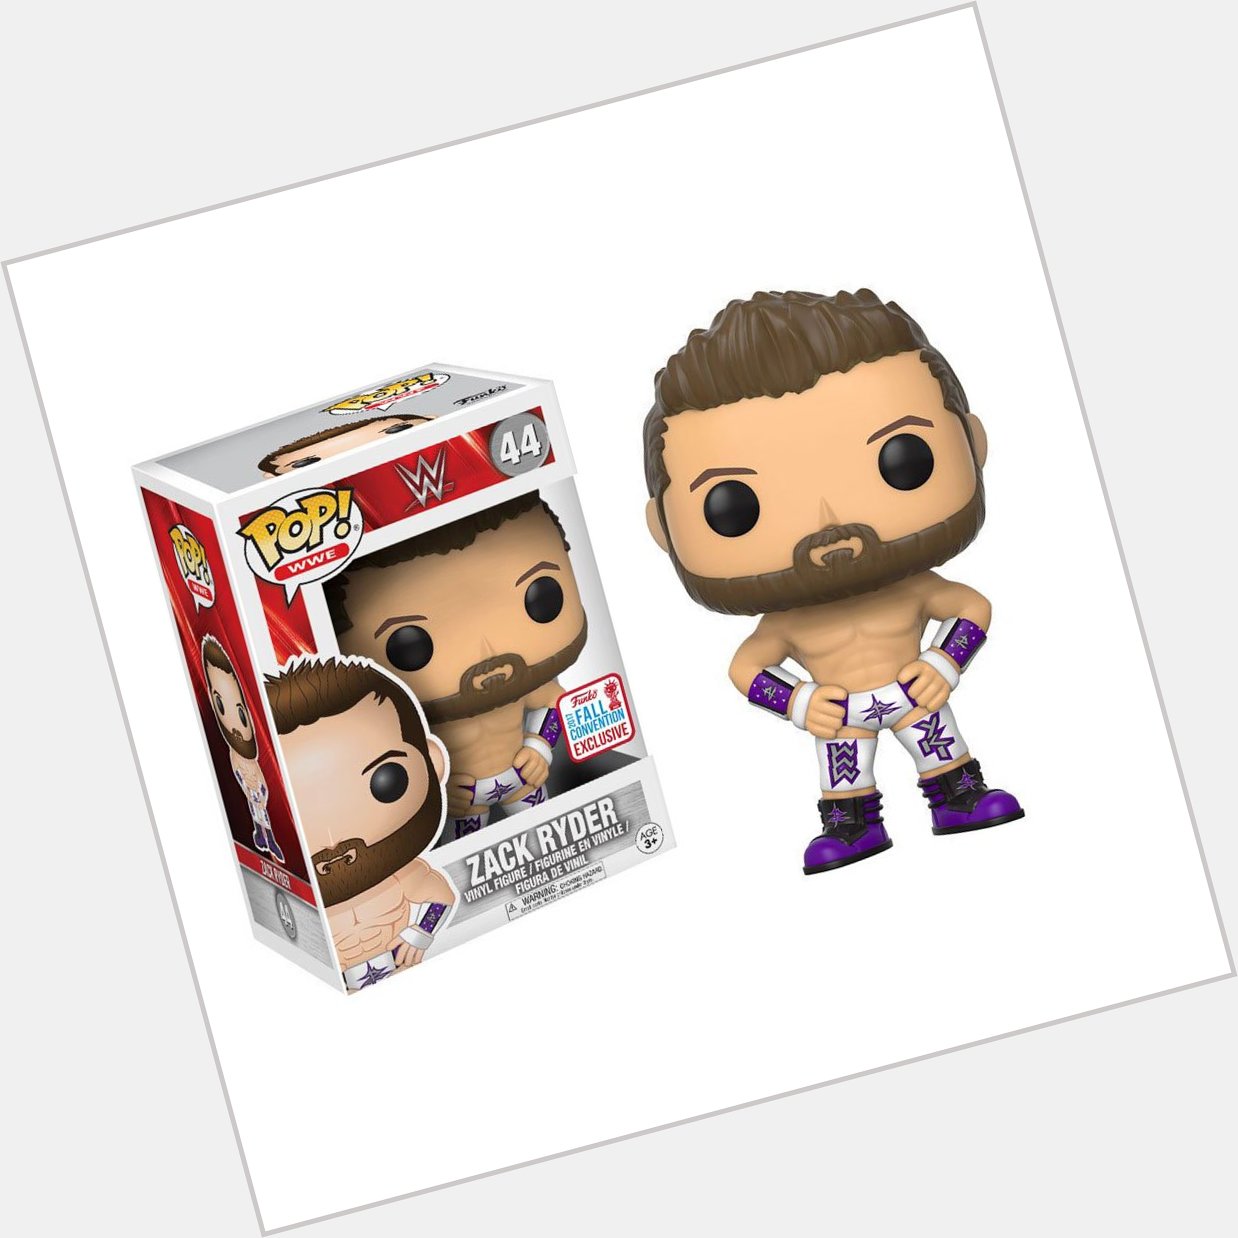 & follow for the chance to win an 2017 exclusive Zack Ryder Pop! Happy Birthday, 